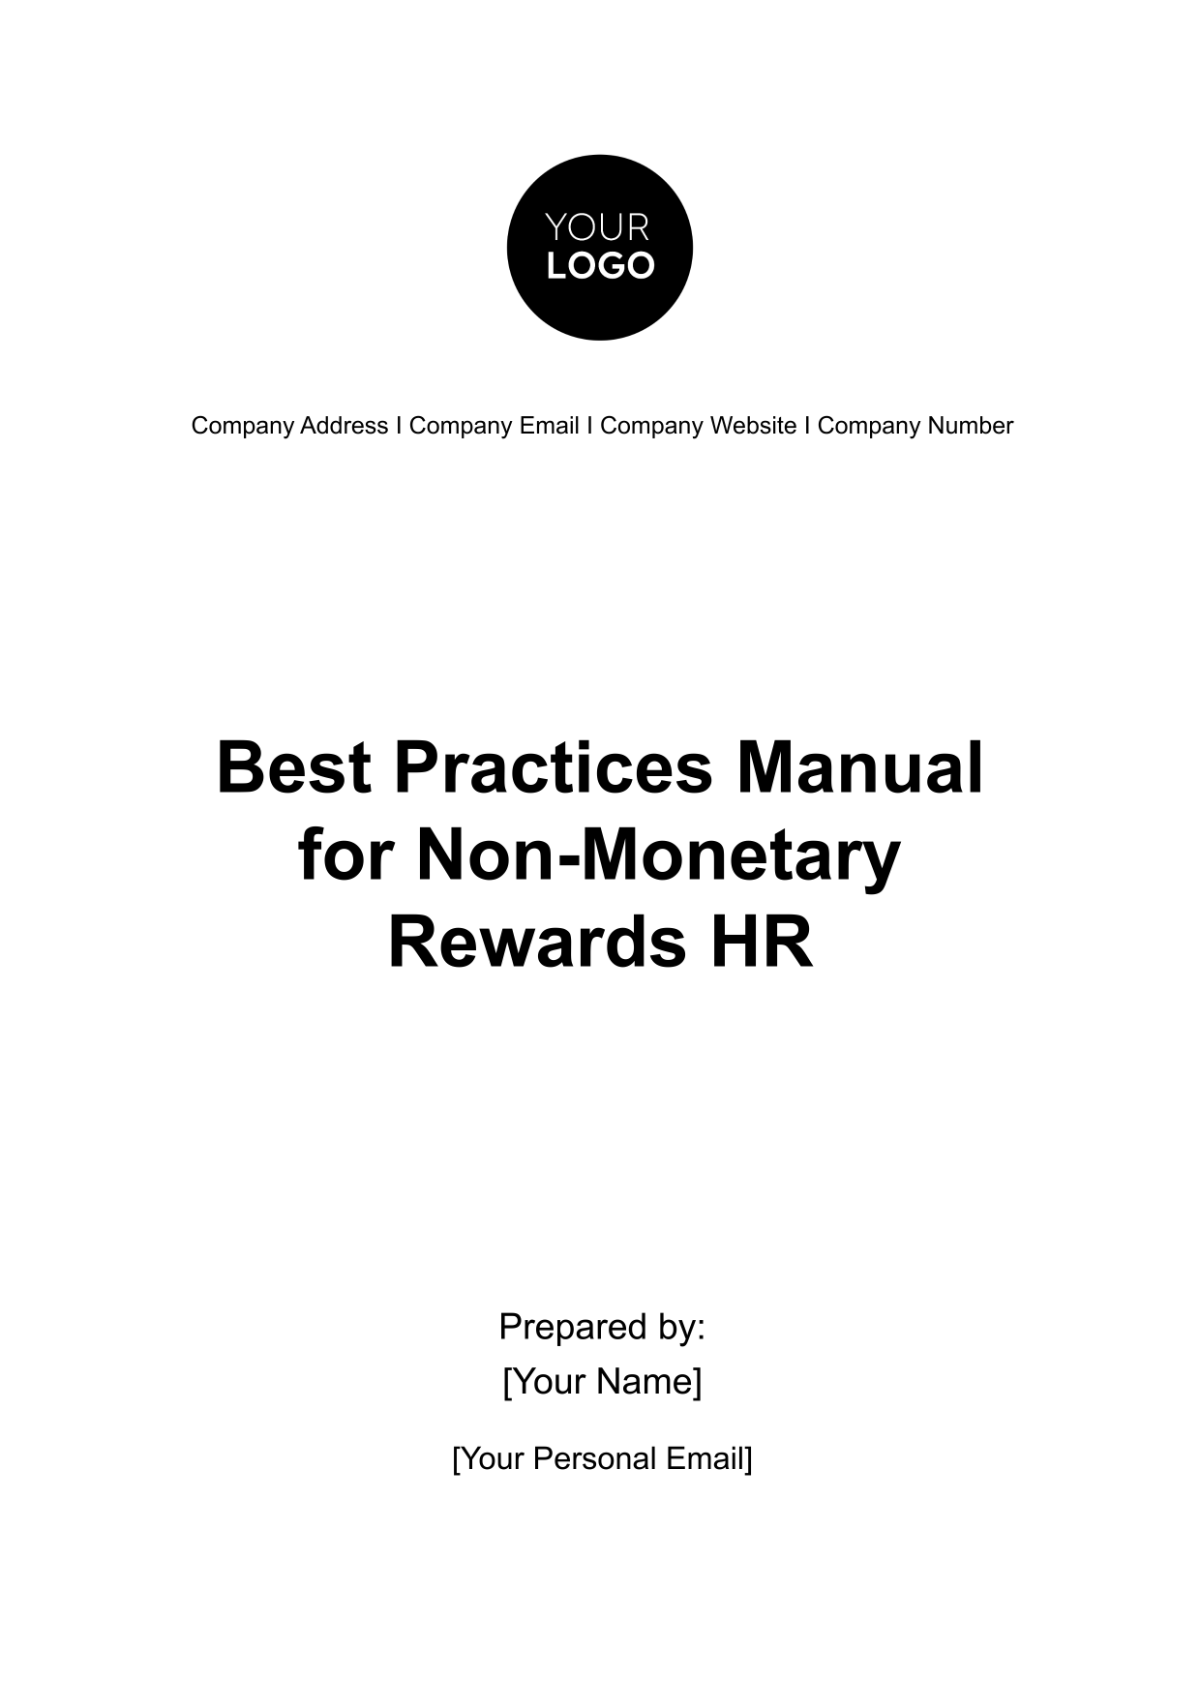 Free Best Practices Manual for Non-Monetary Rewards HR Template